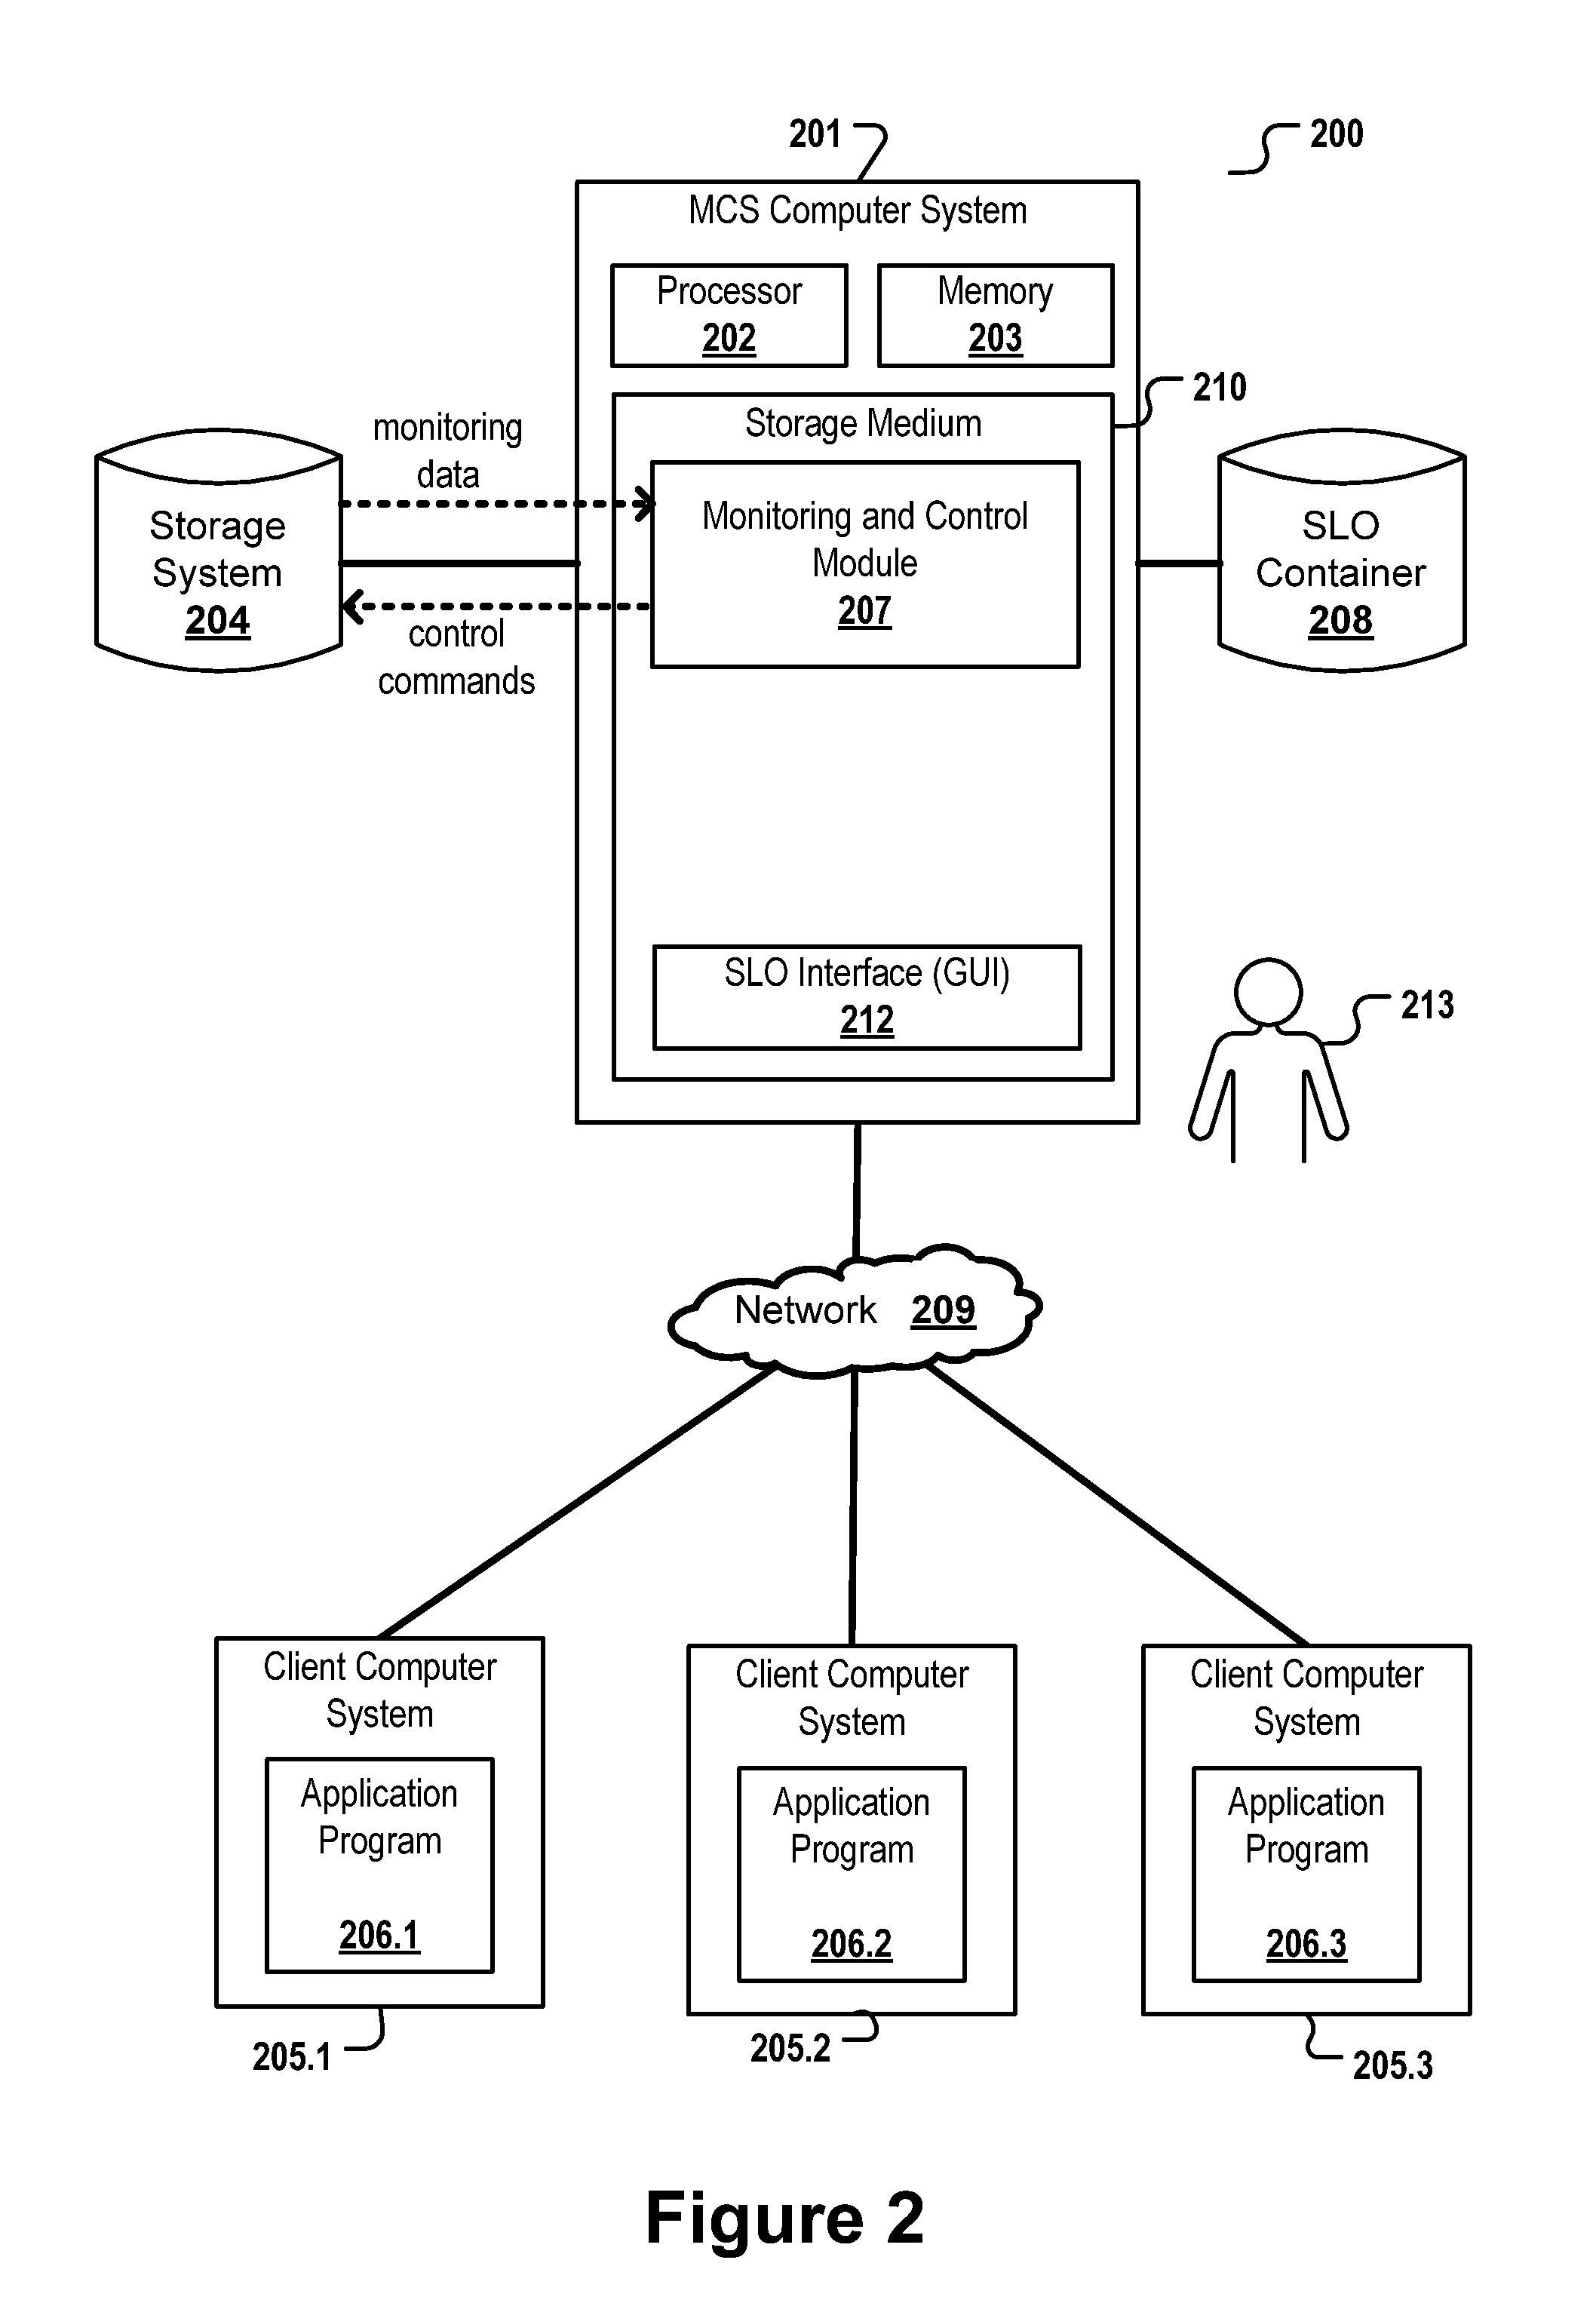 Controlling a Storage System